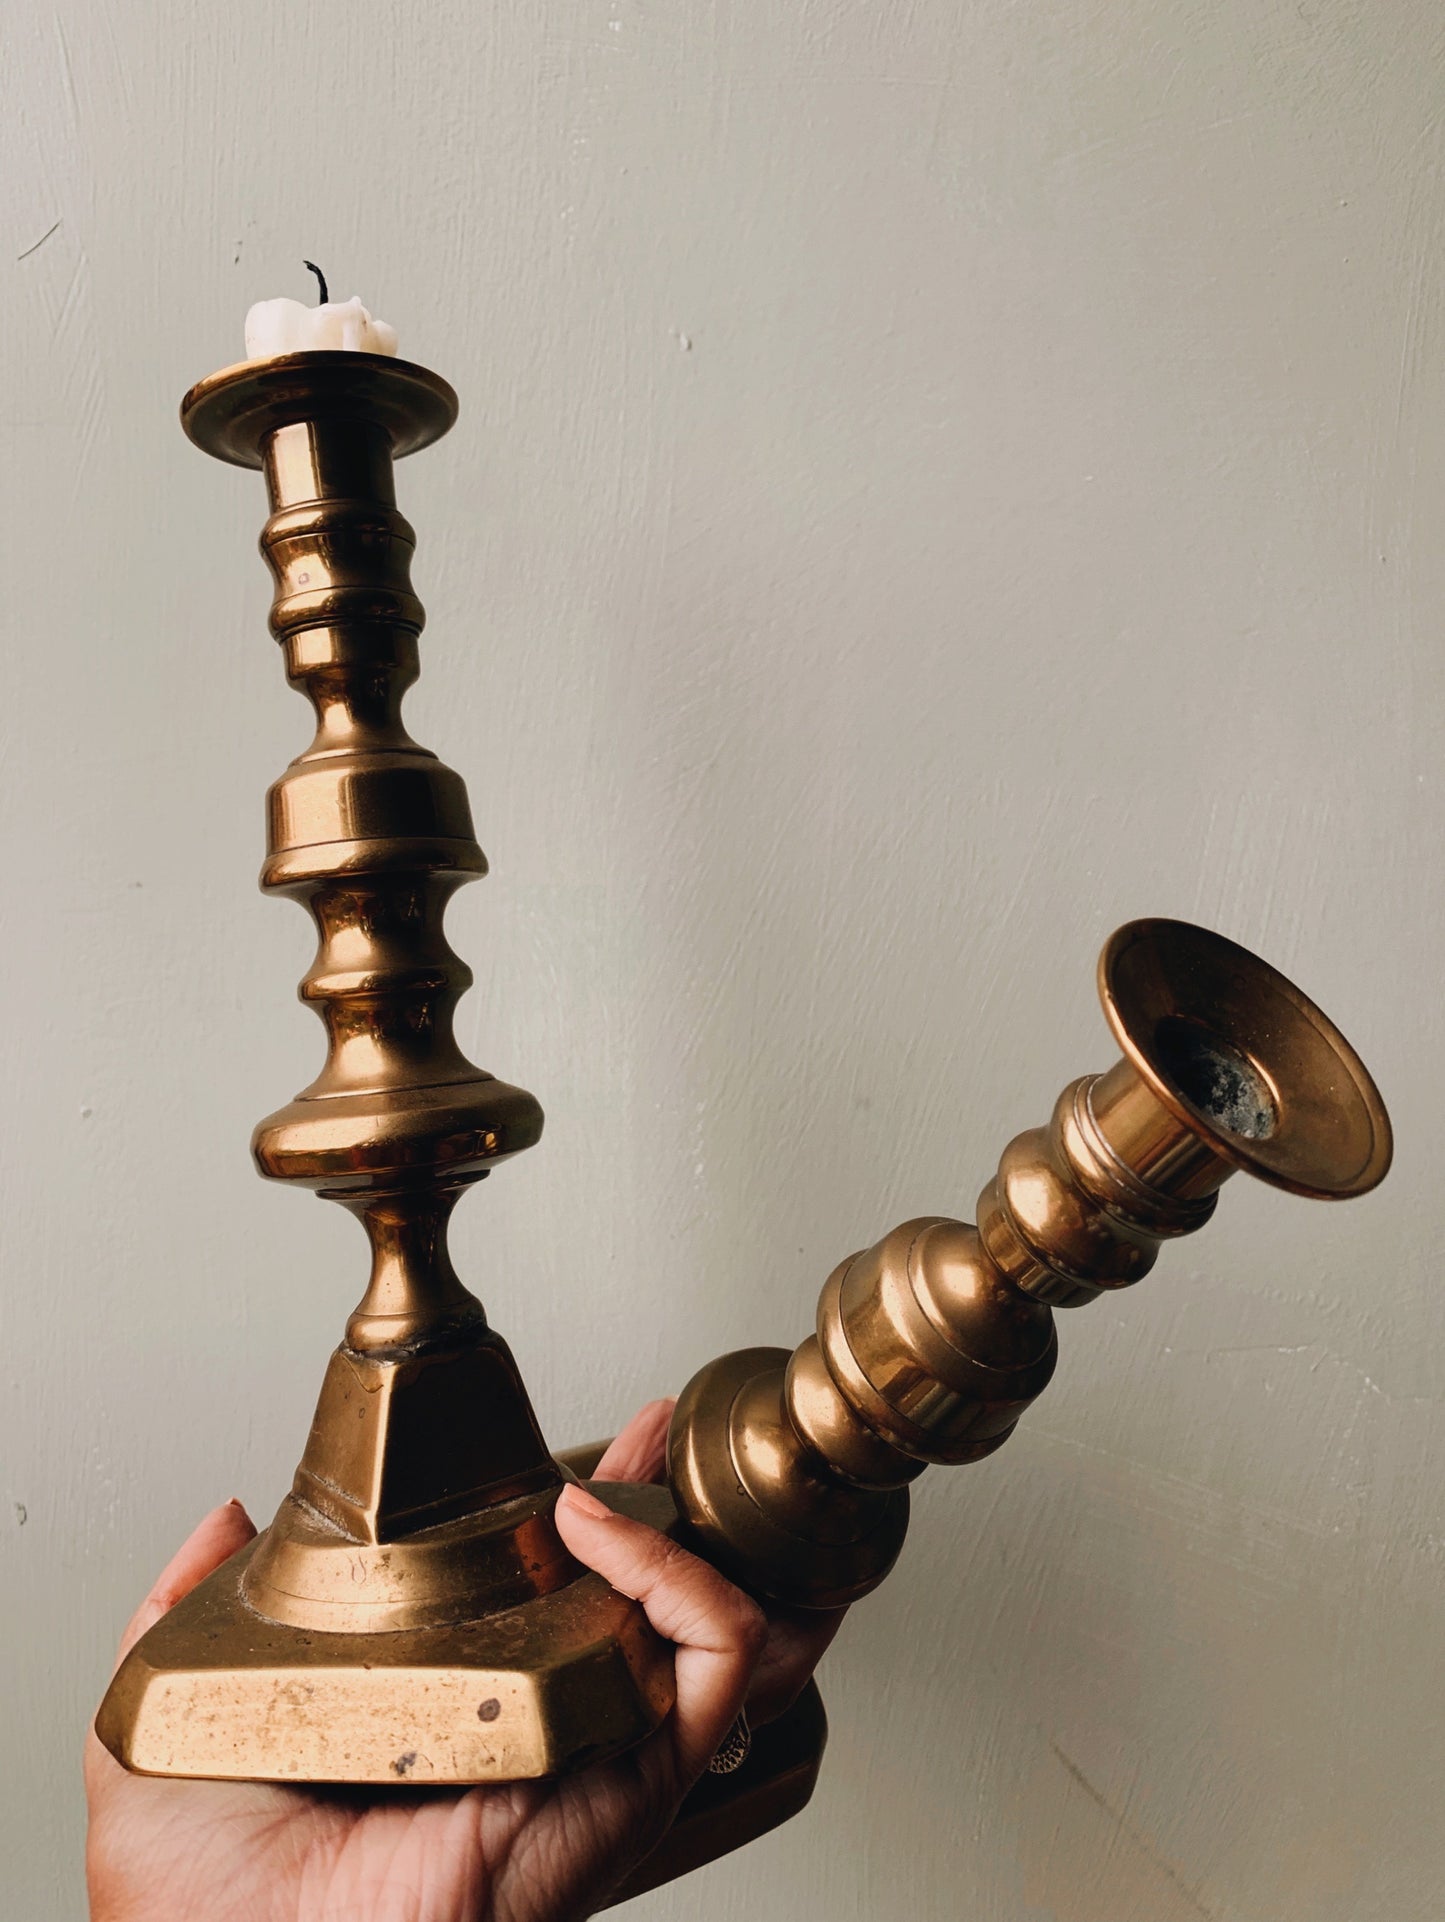 Two Large Antique Brass Candle Sticks